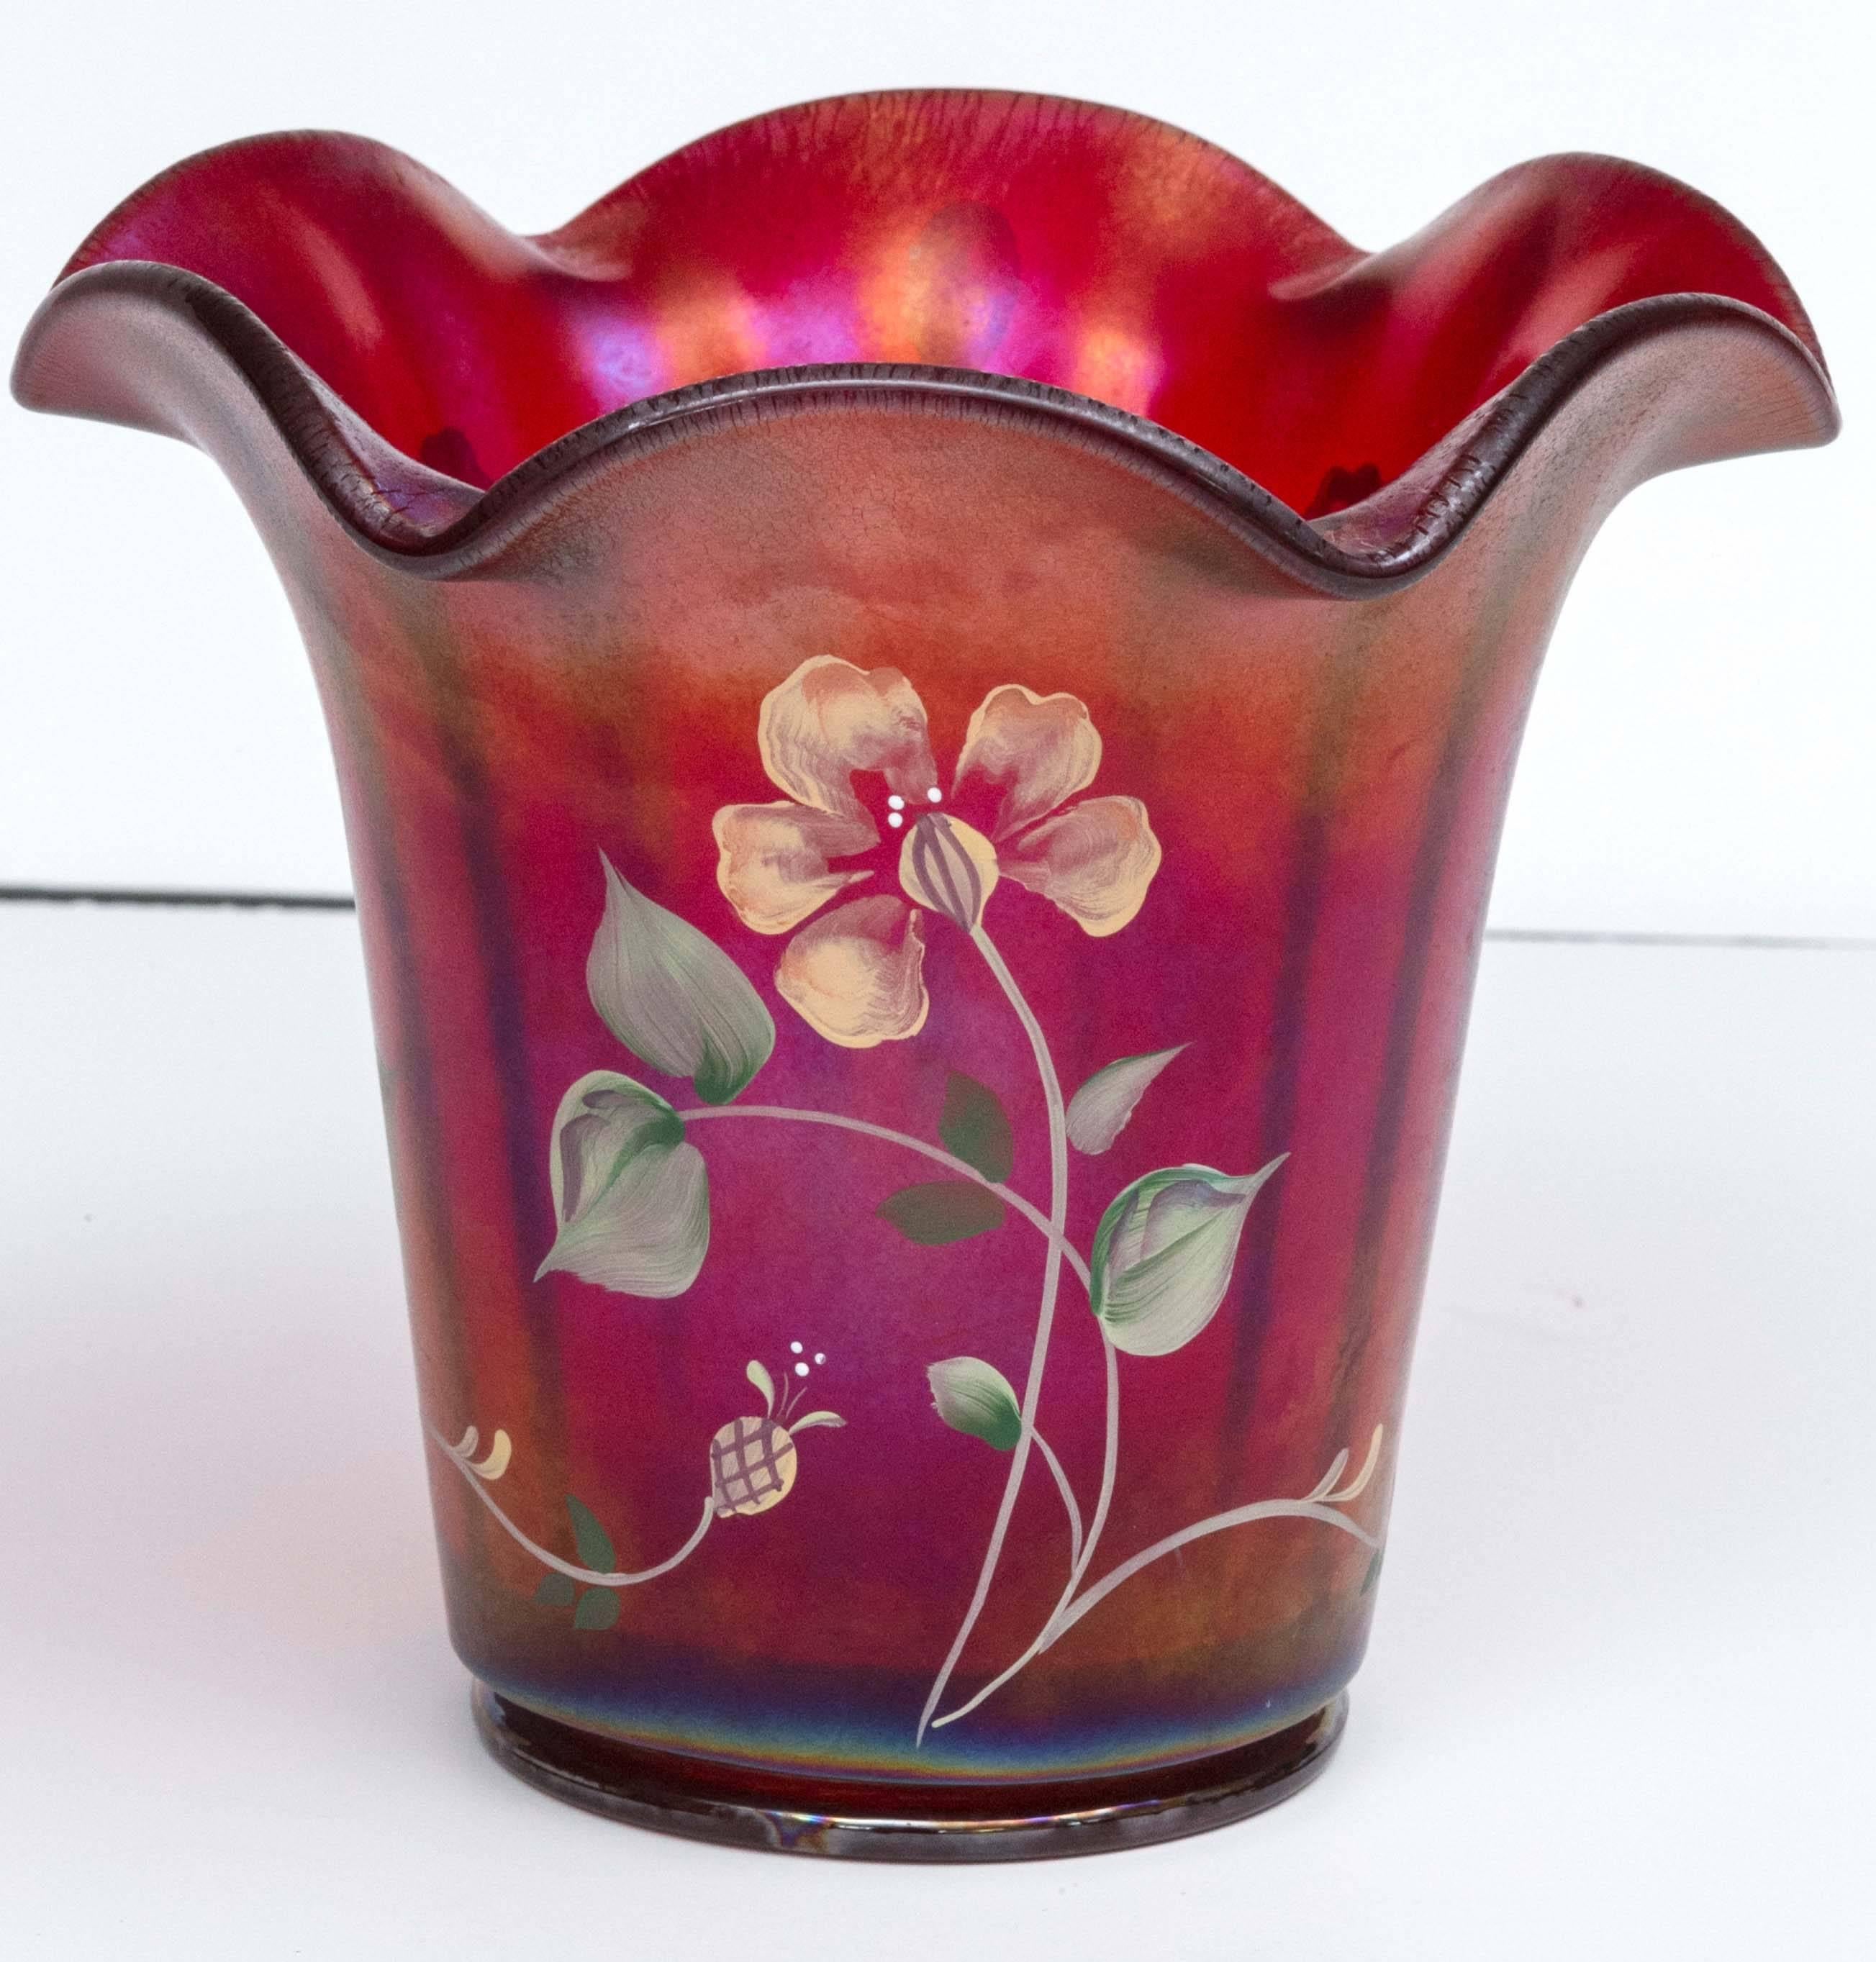 Fenton 100th anniversary founder's vase - hand-painted and signed D Robinson. Also signed by George Fenton and Frank Fenton. Stunning carnival glass with exquisite hand-painted flowers. Beautiful piece of history.